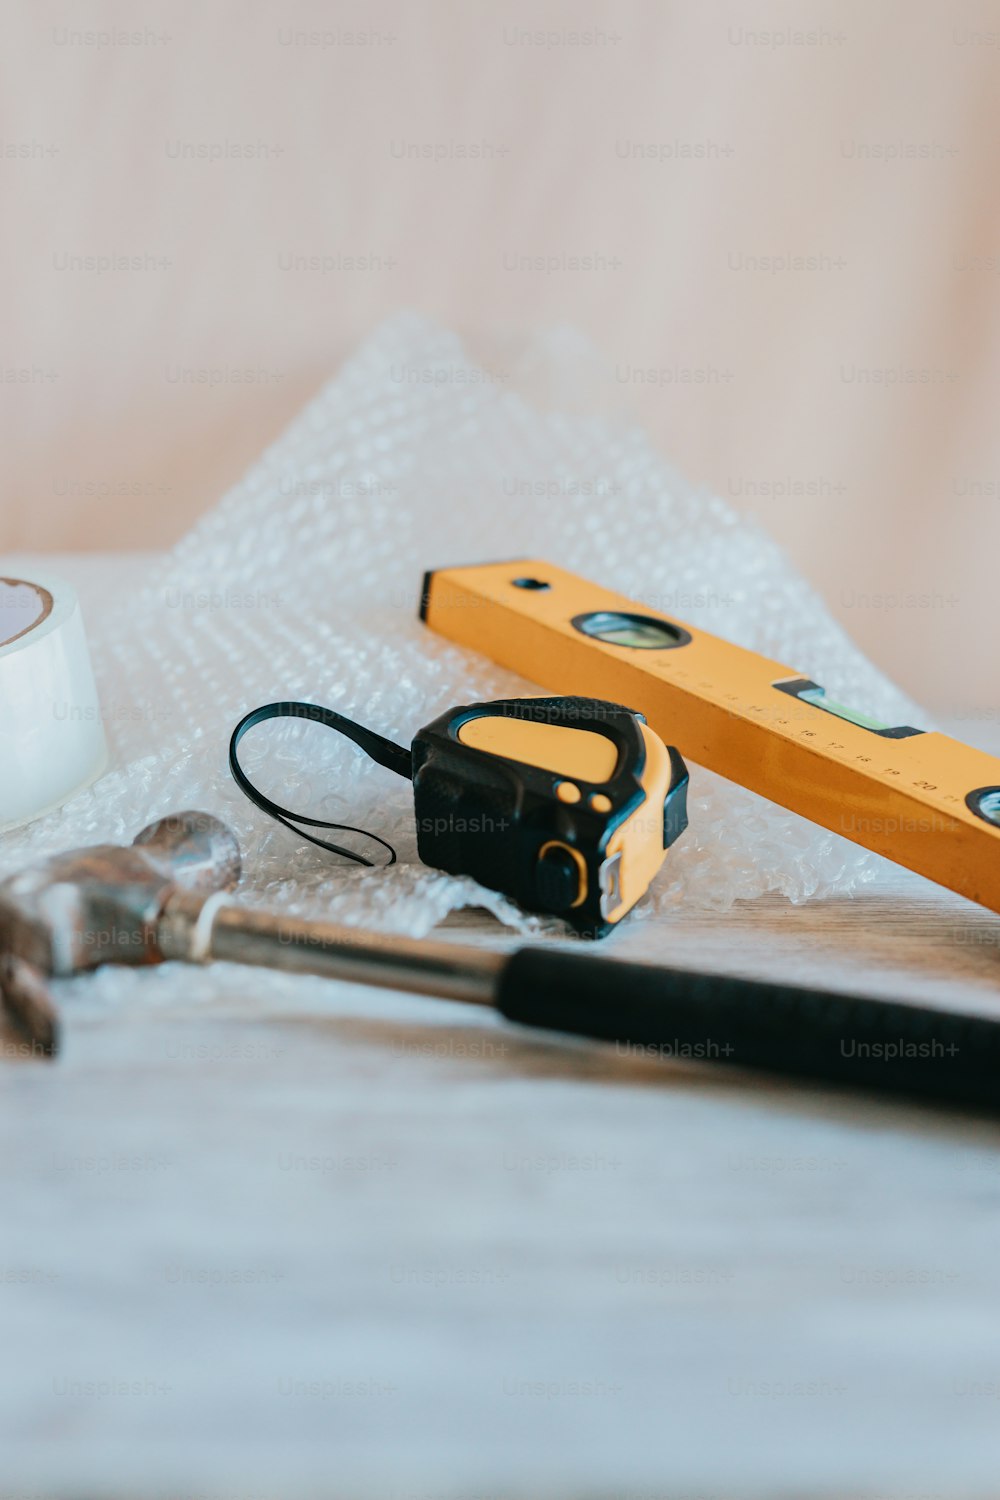 a pair of scissors, a tape measure, and some other tools on a table